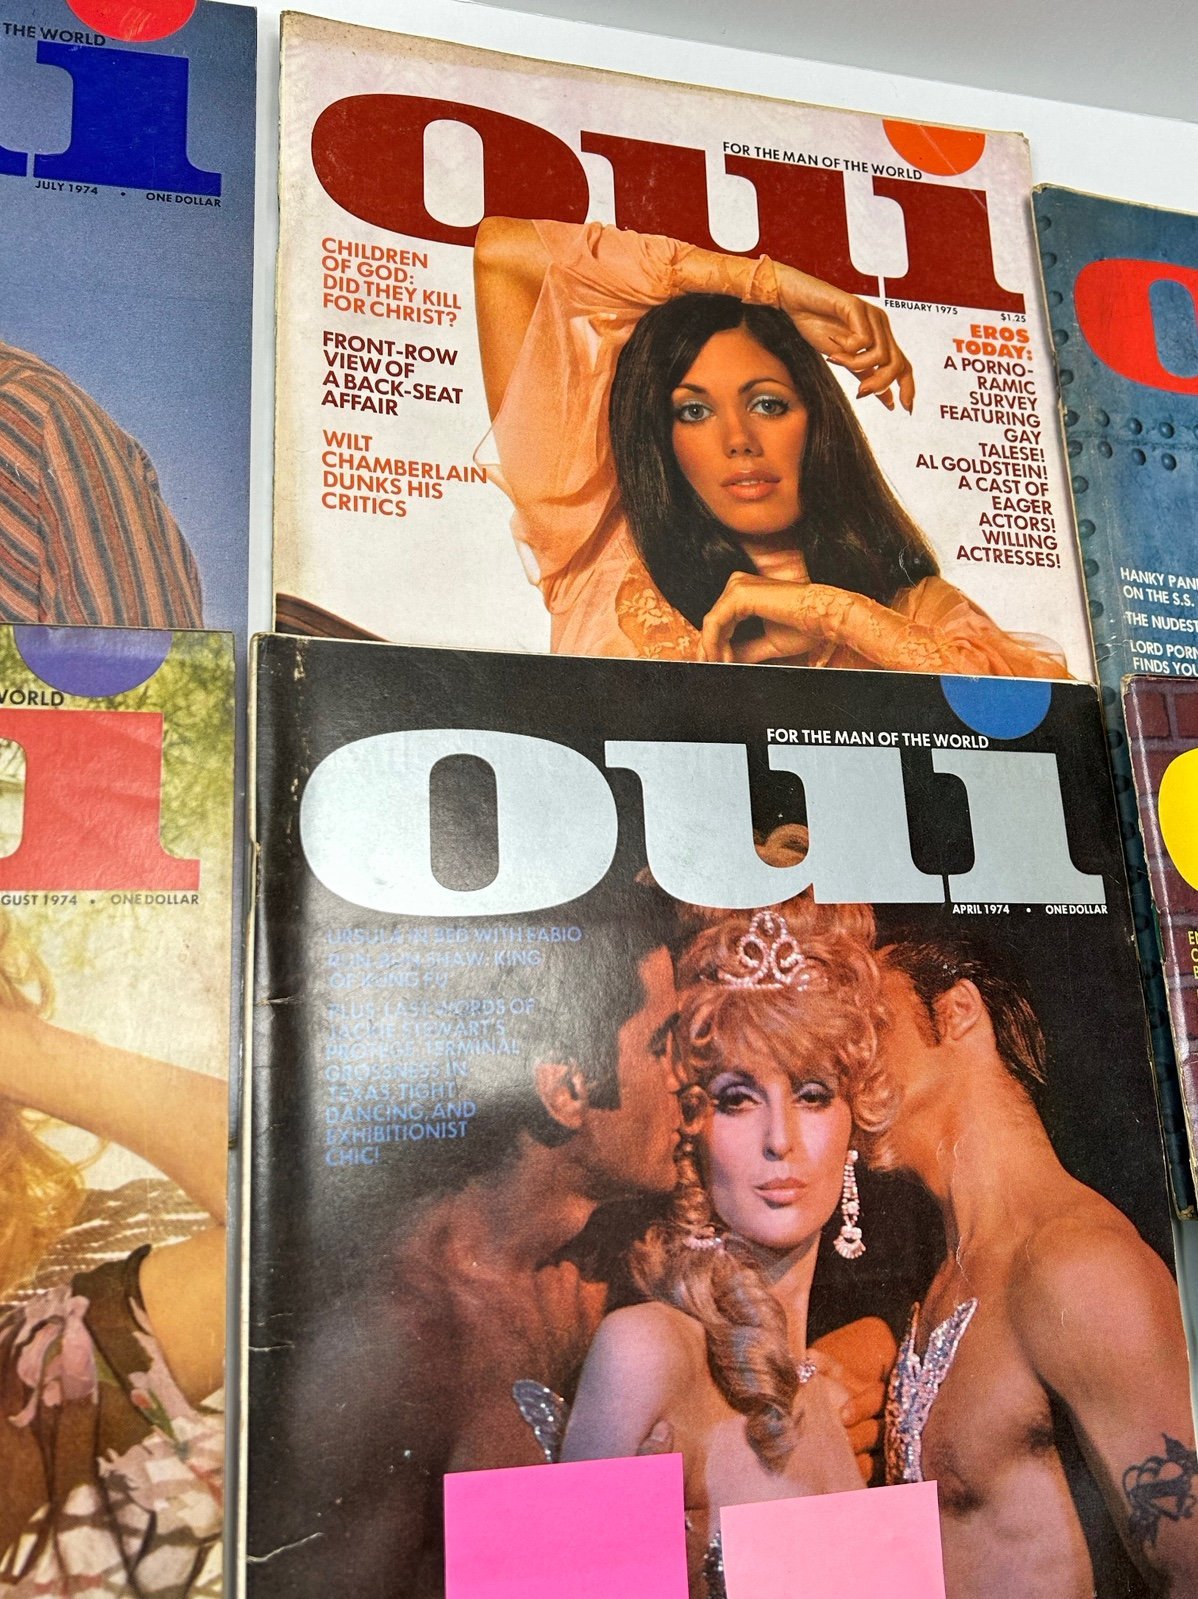 OUI Magazine lot of 6! From the 70’s! g2nfEpgF5